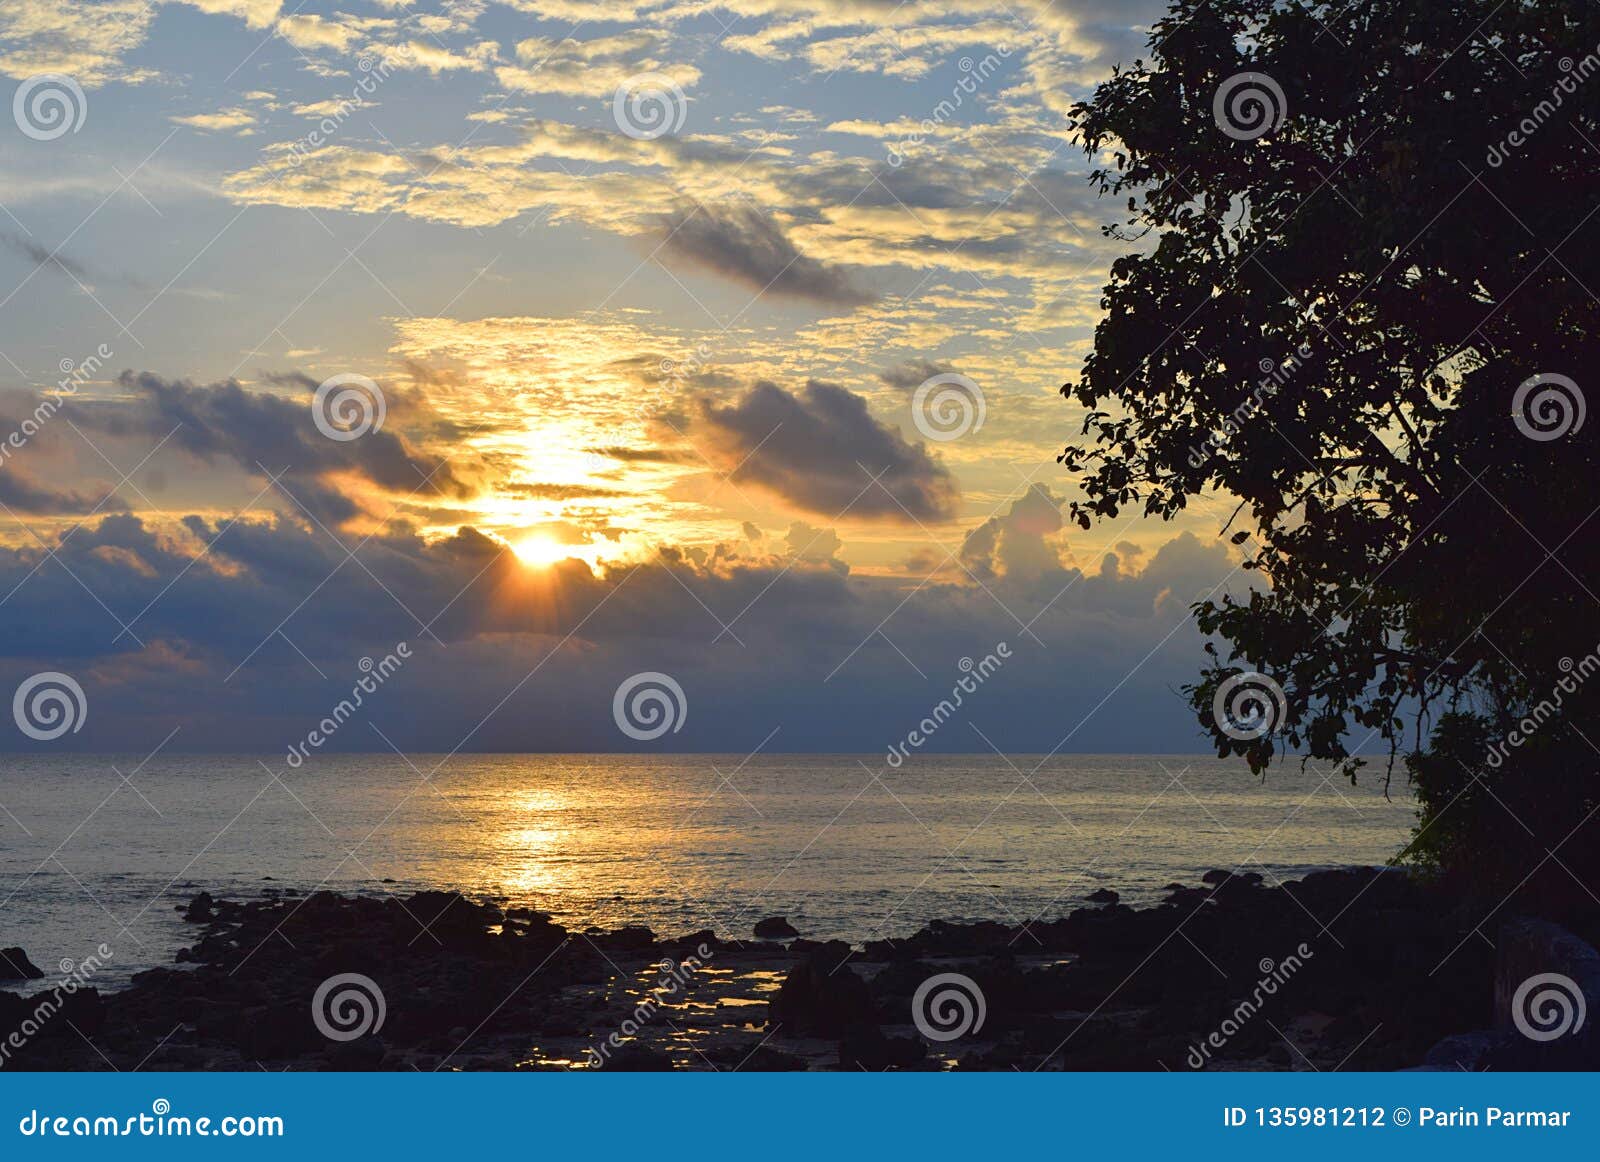 rising sun with golden sunshine with clouds in sky with lining over sea and contours of tree and stones - neil island, andaman